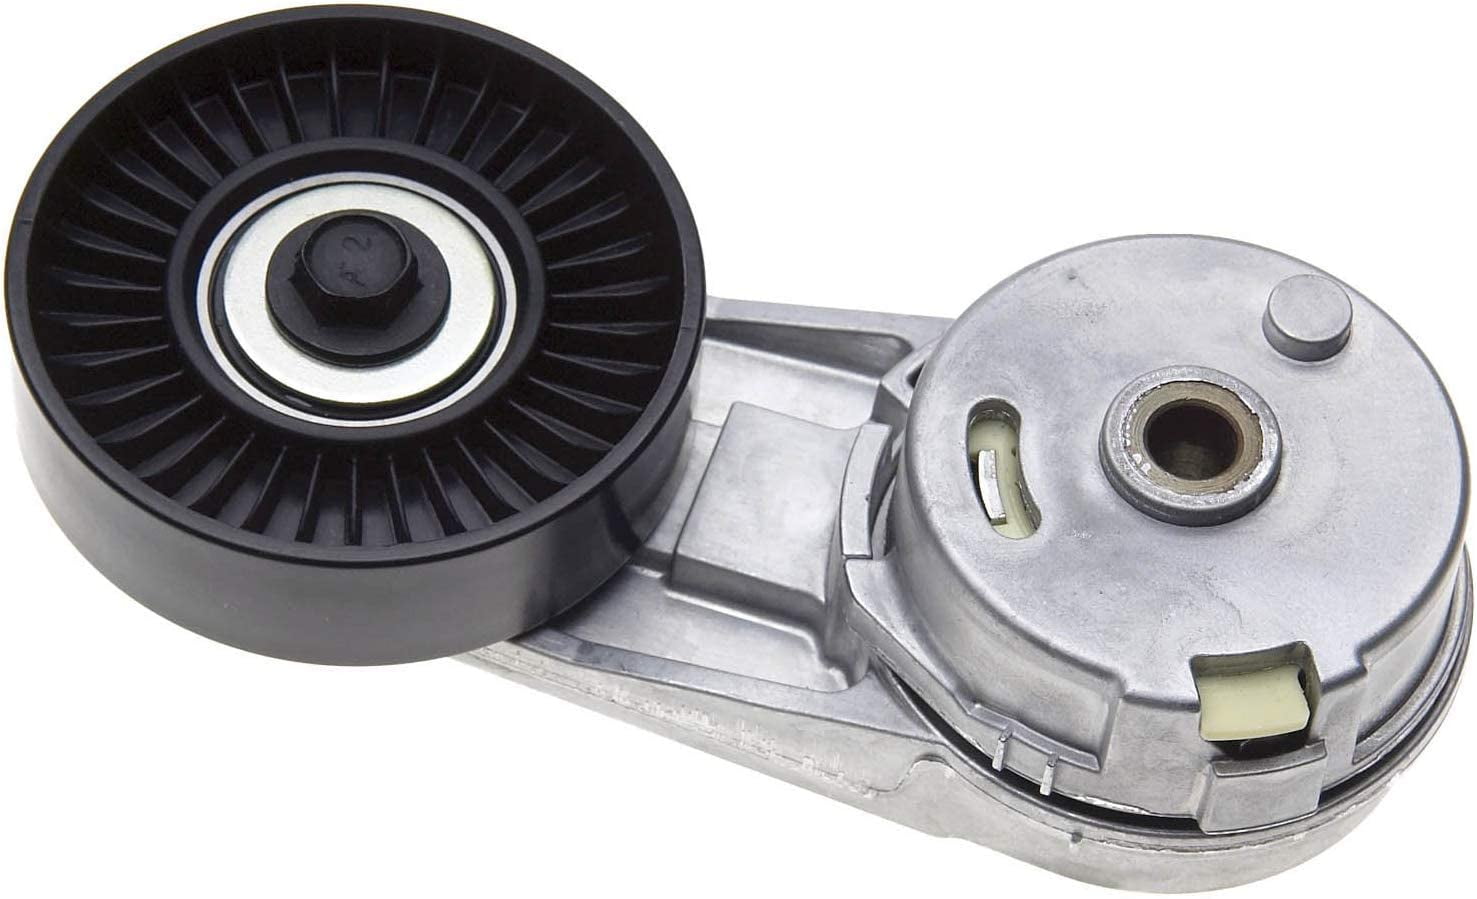 Serpentine Belt Tensioner for Chevy Buick Cadillac Pontiac Oldsmobile